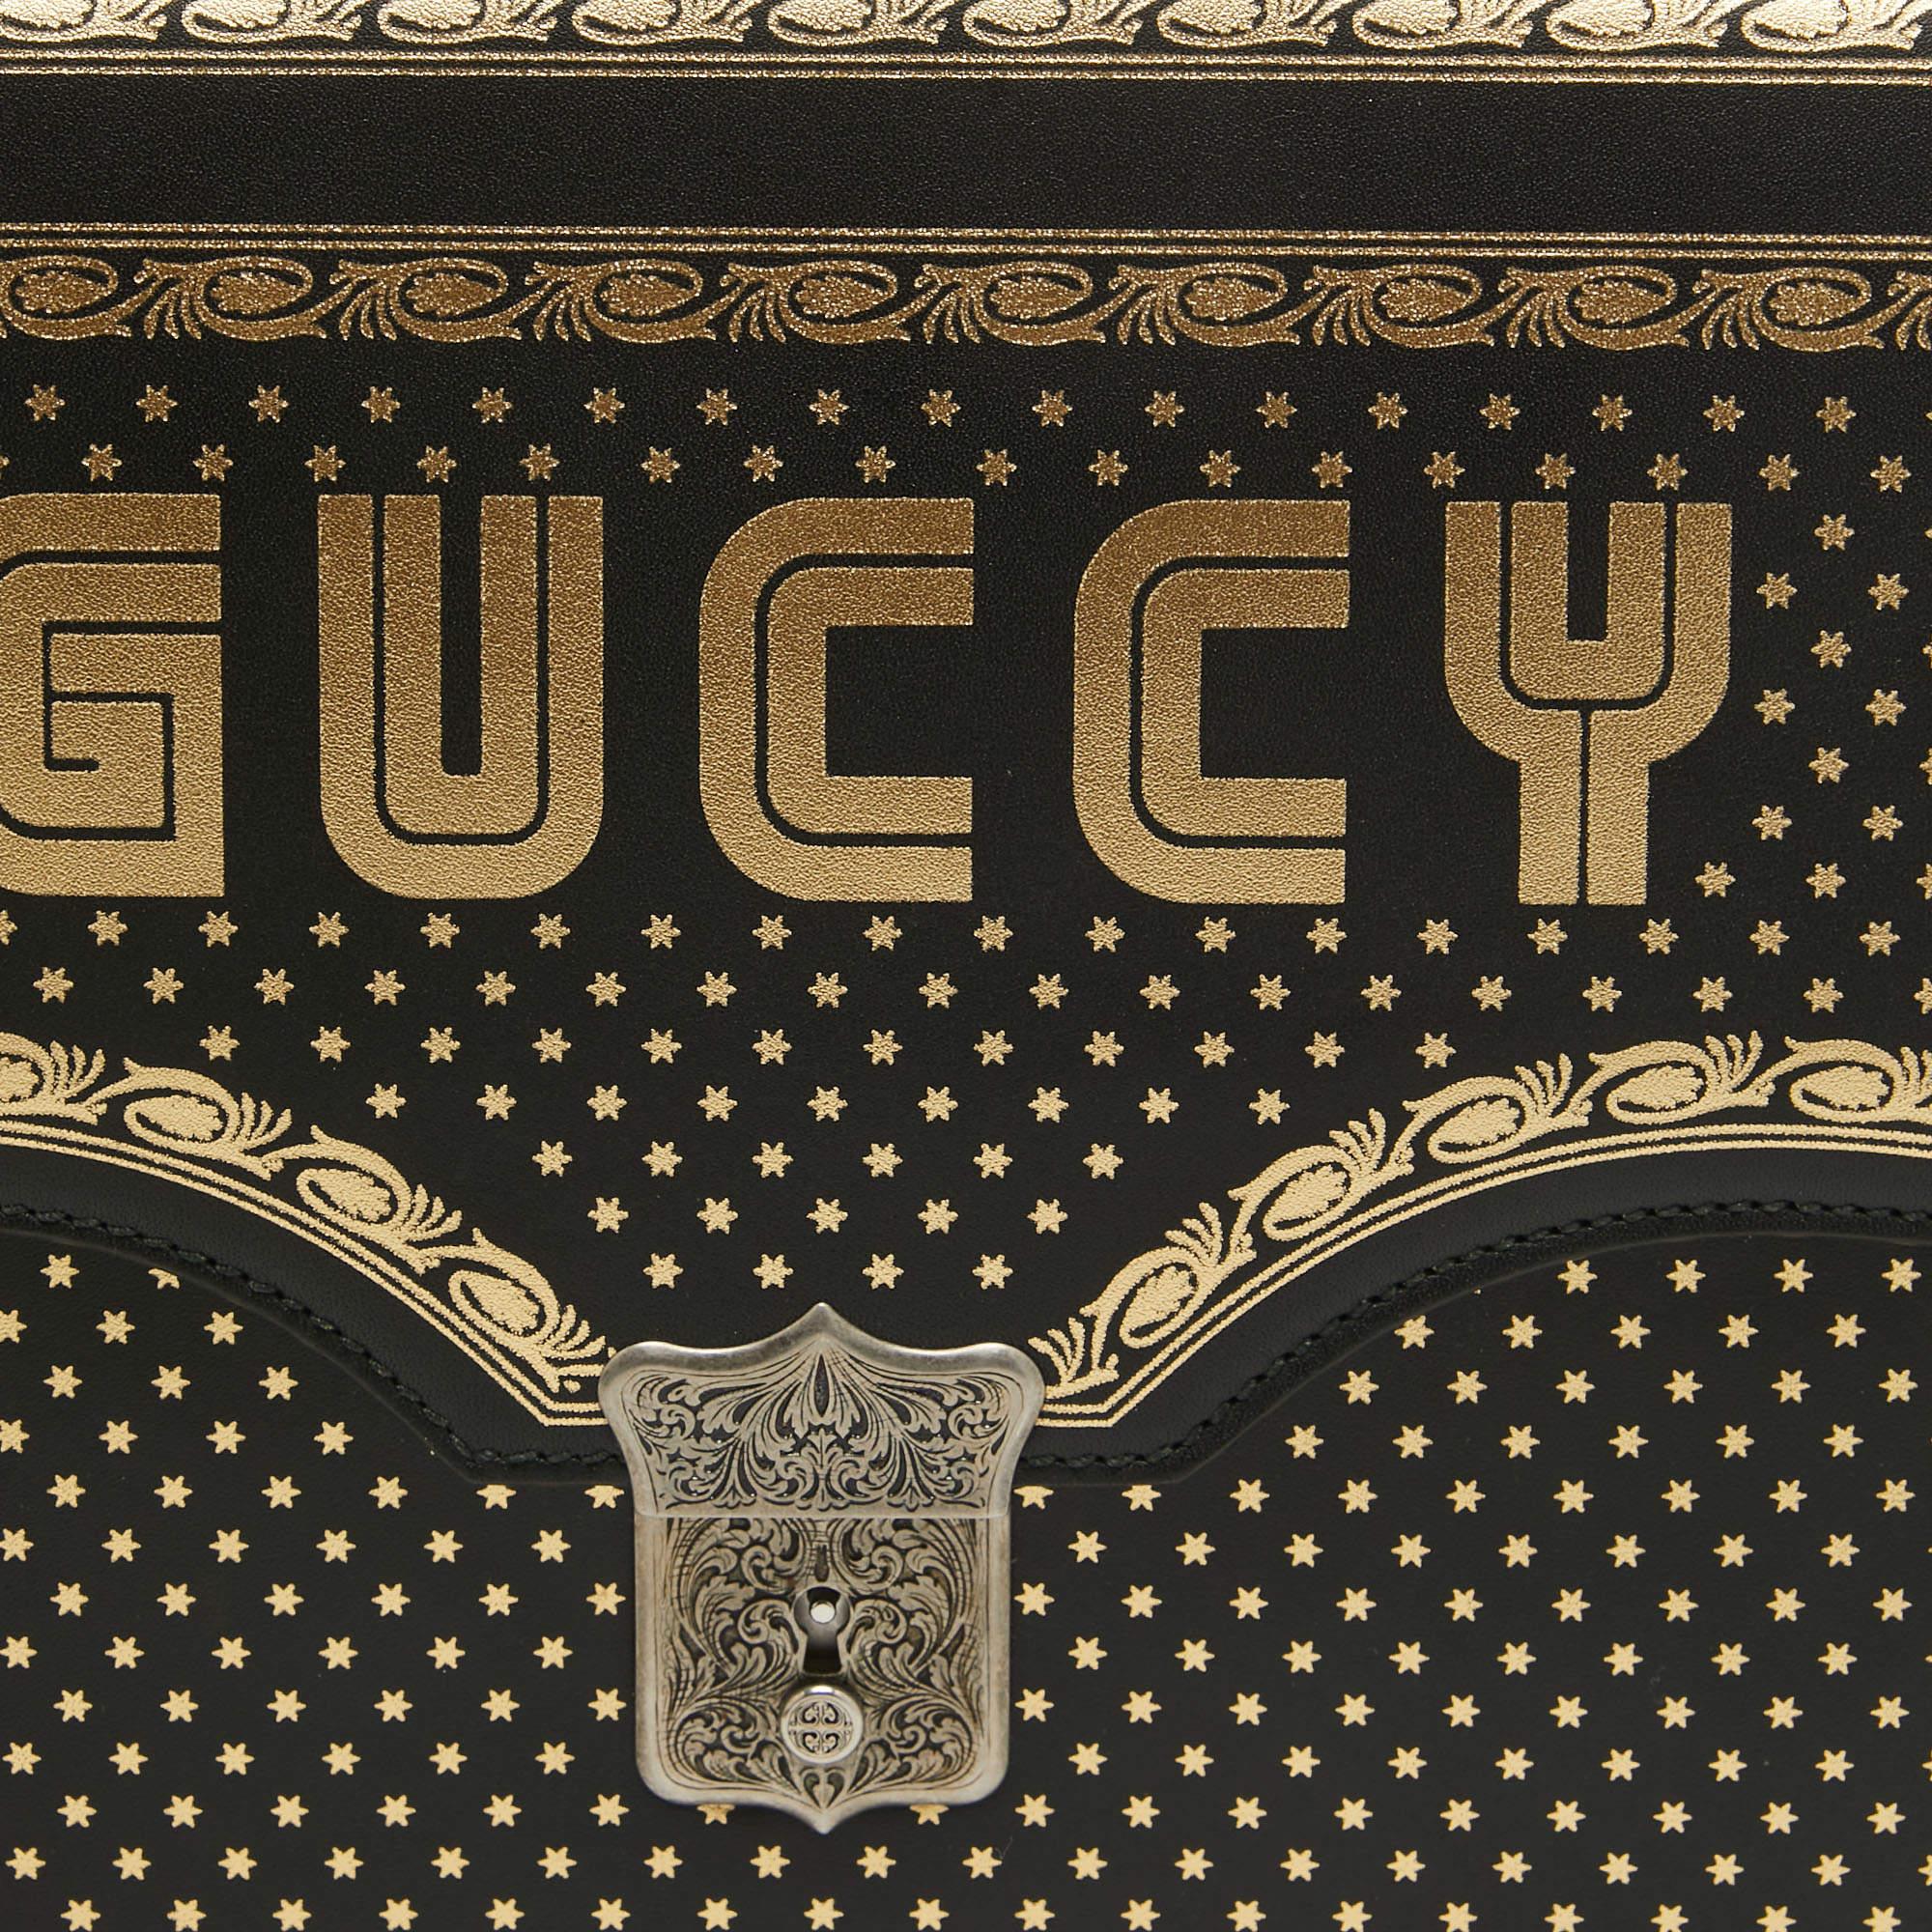 Gucci Black/Gold Leather Printed GUCCY Portfolio Clutch For Sale 4